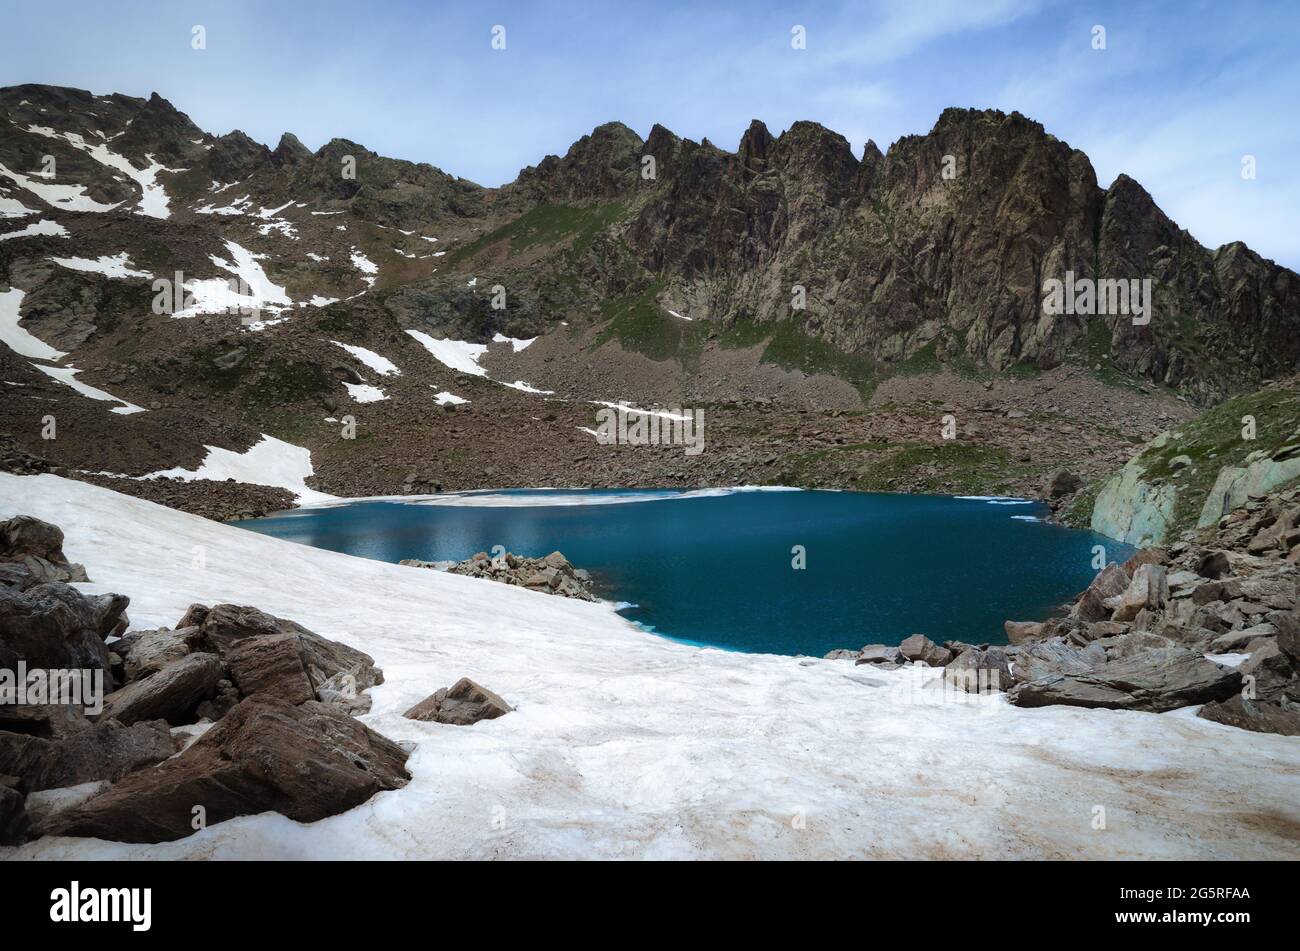 Mountain lake of Laroussa, in Stura Valley, Piedmont, between maritime alps park (italy) and mercantour park (france). The blue water is surrounded by Stock Photo